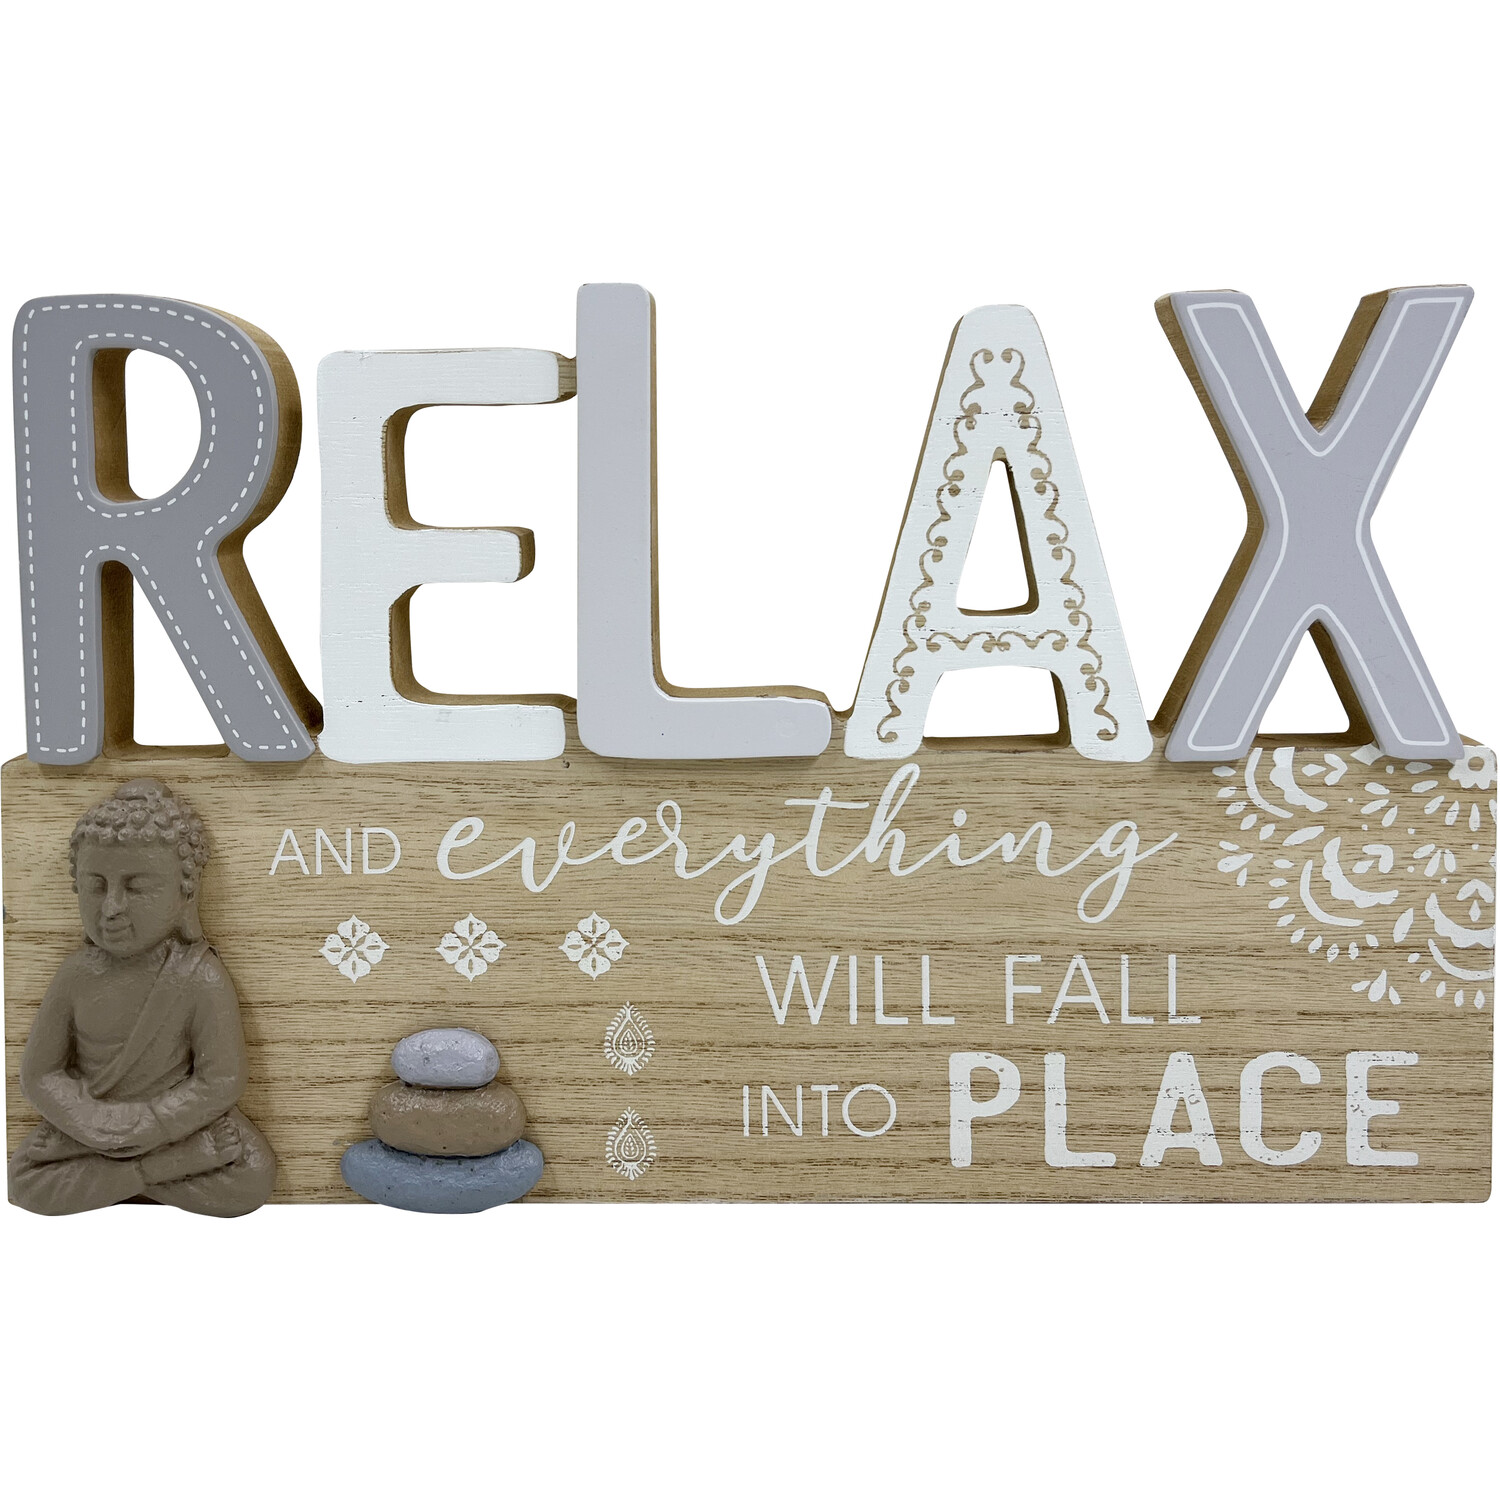 Relaxing Buddha Wood Effect Plaque - Natural Image 1